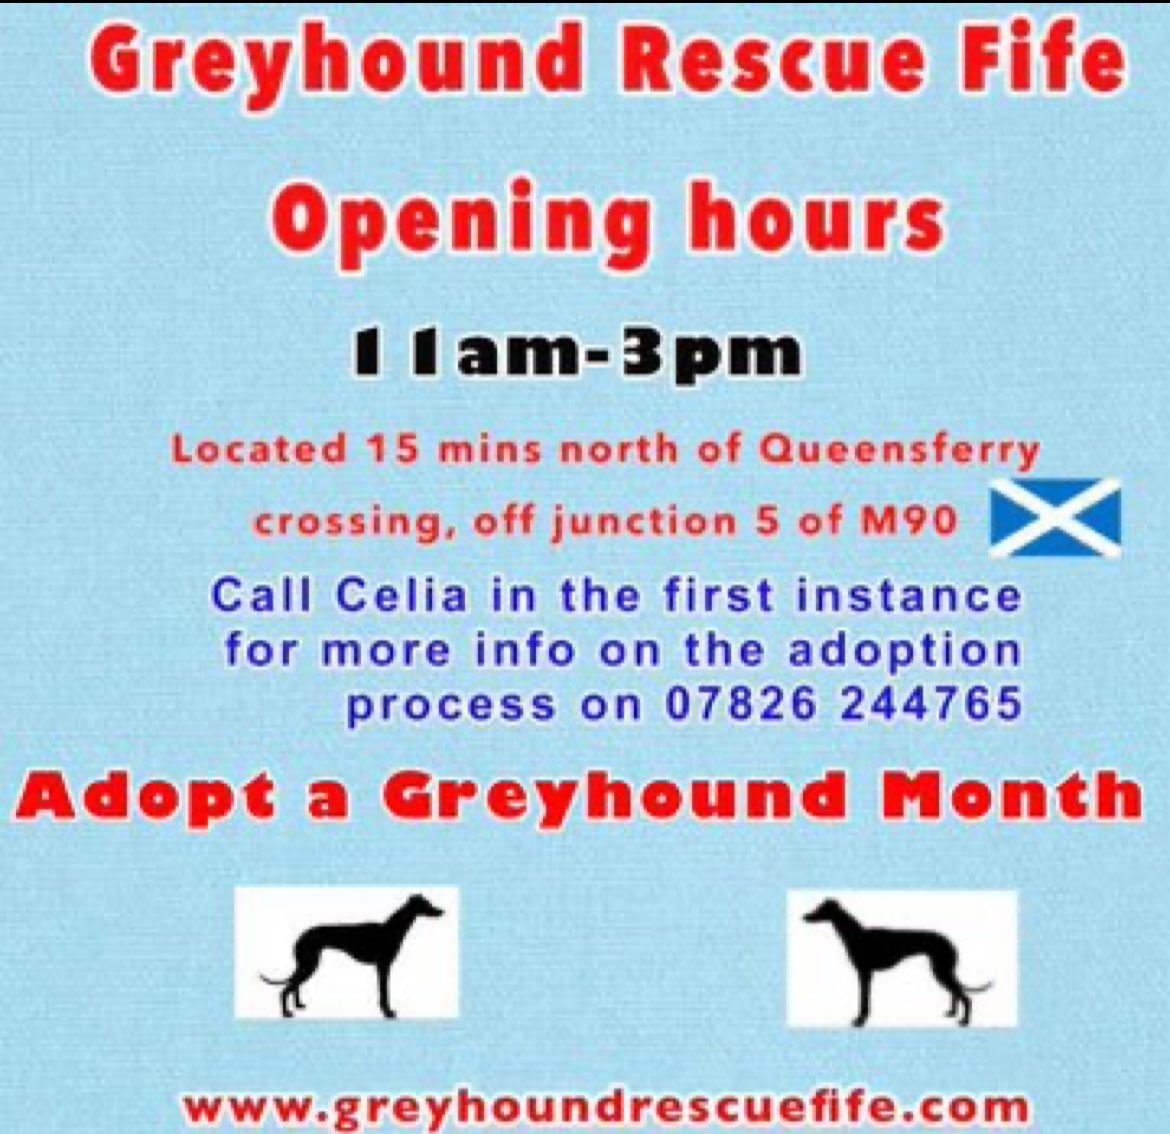 This #AdoptAGreyhoundMonth don’t forget 5 special boys, who have been in rescue too long. They each deserve an adopter who can offer, love & patience. Reece(2yrs in rescue), Bob Matt, Duke(18 mths)& Scout a yr. Please call Celia for info #forgottensoulshour #AdoptDontShop 🏴󠁧󠁢󠁳󠁣󠁴󠁿🤞🏽❤️